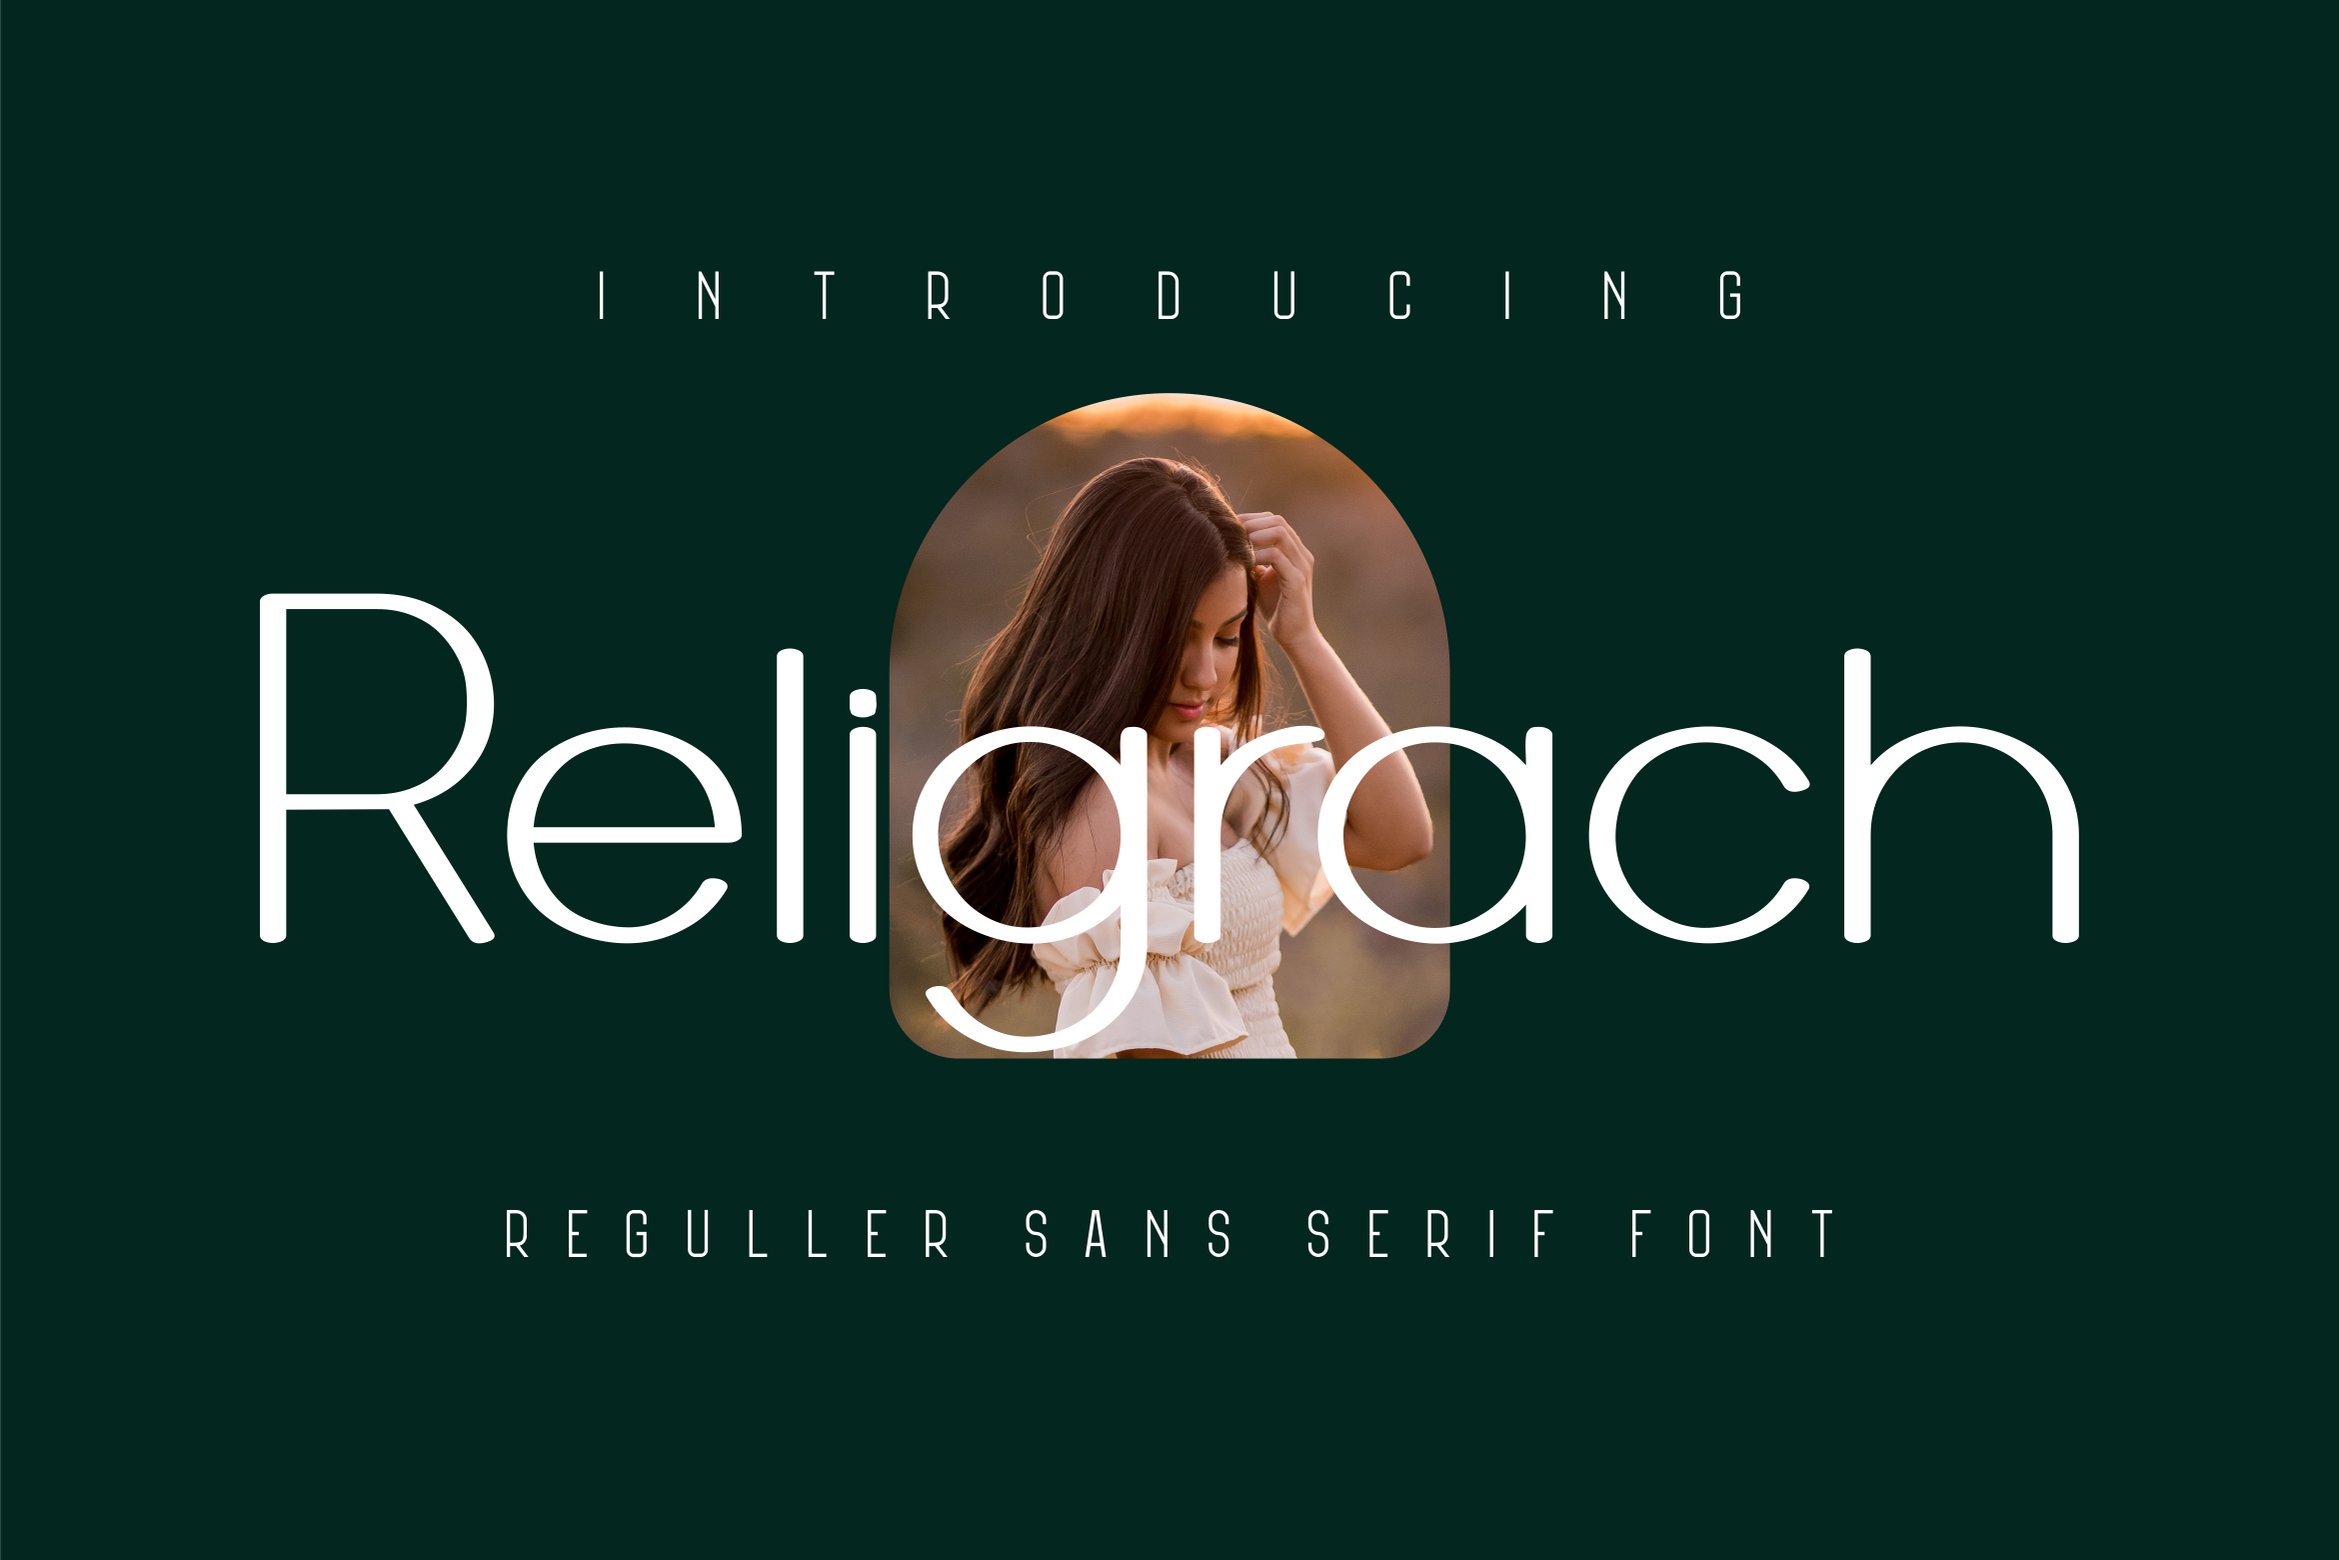 Religrach Font cover image.